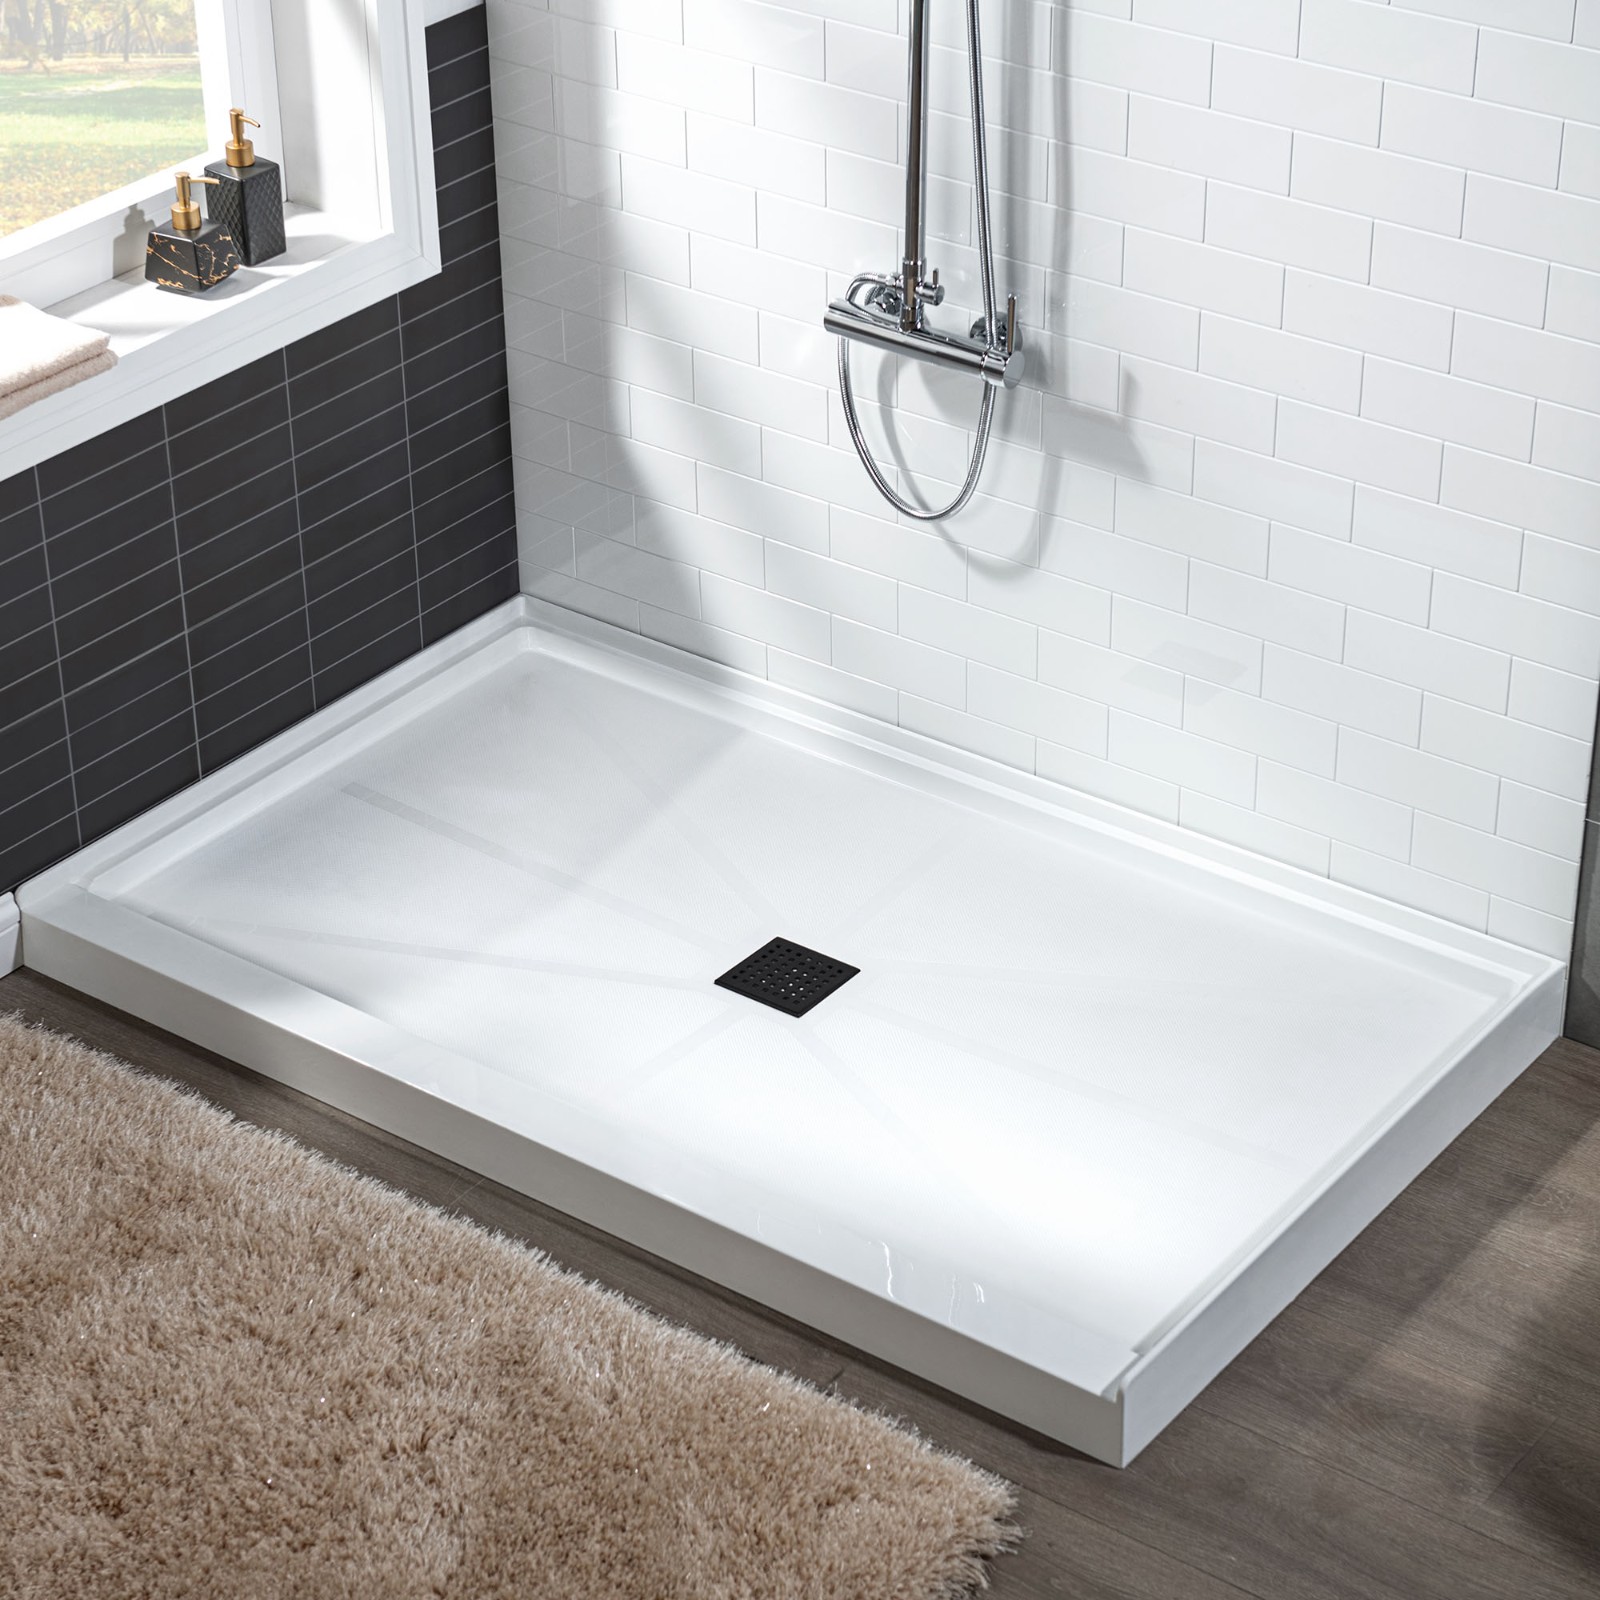  WOODBRIDGE SBR4832-1000C-MB SolidSurface Shower Base with Recessed Trench Side Including Matte Black Linear Cover, 48